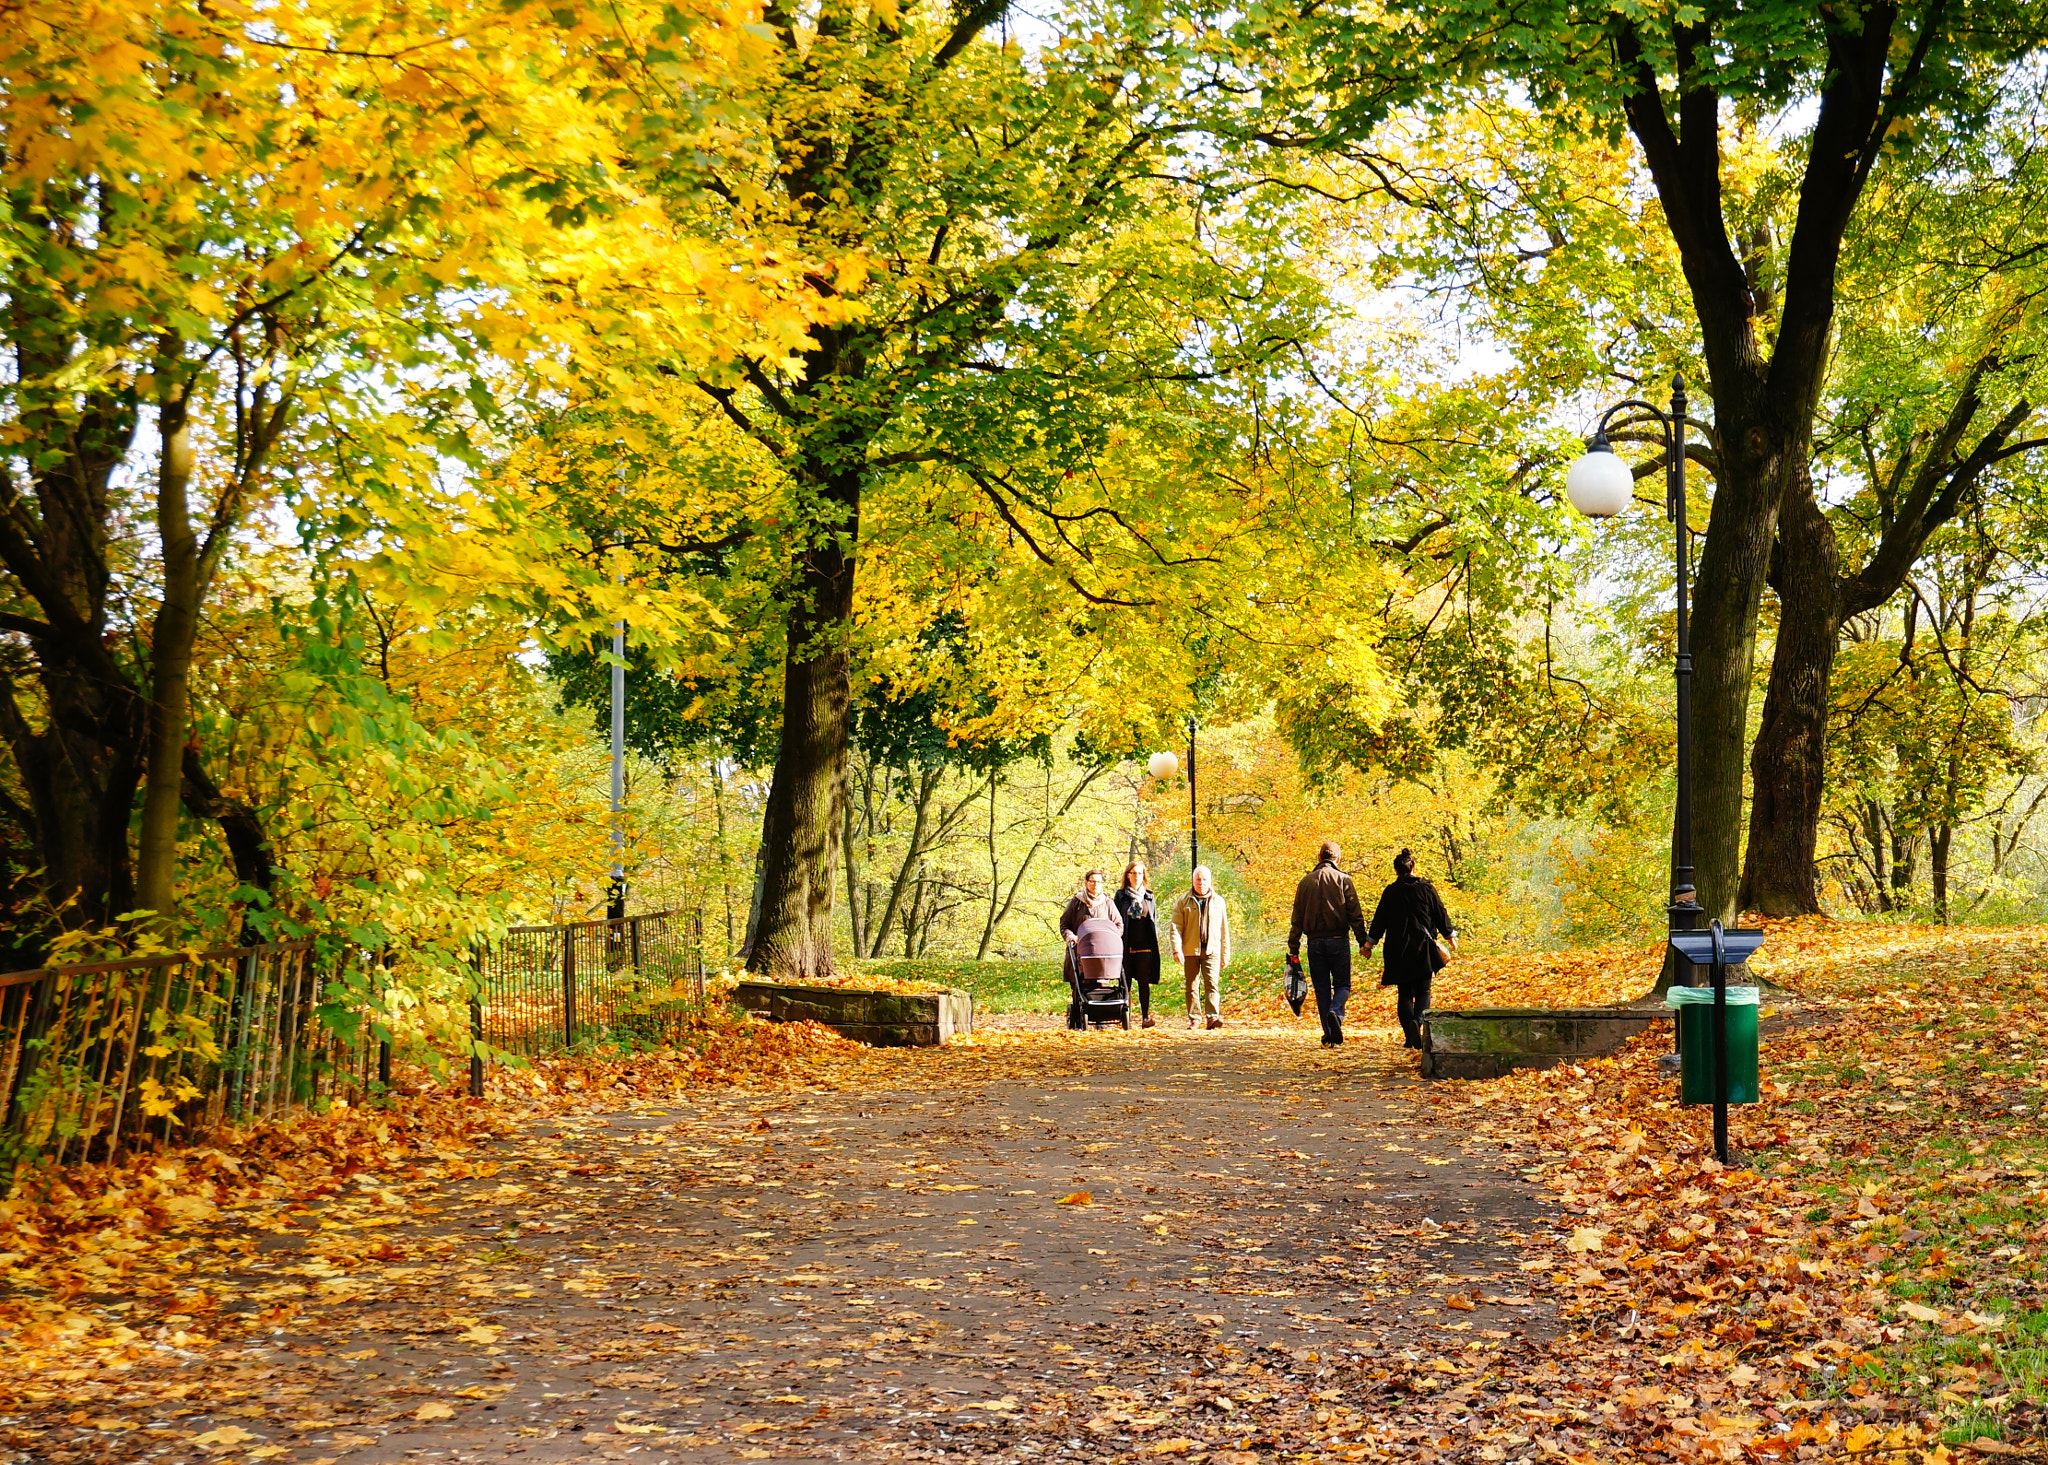 Sony E 16-50mm F3.5-5.6 PZ OSS sample photo. Poznan, poland - october 20, 2013: people walking at a park in the autumn season photography